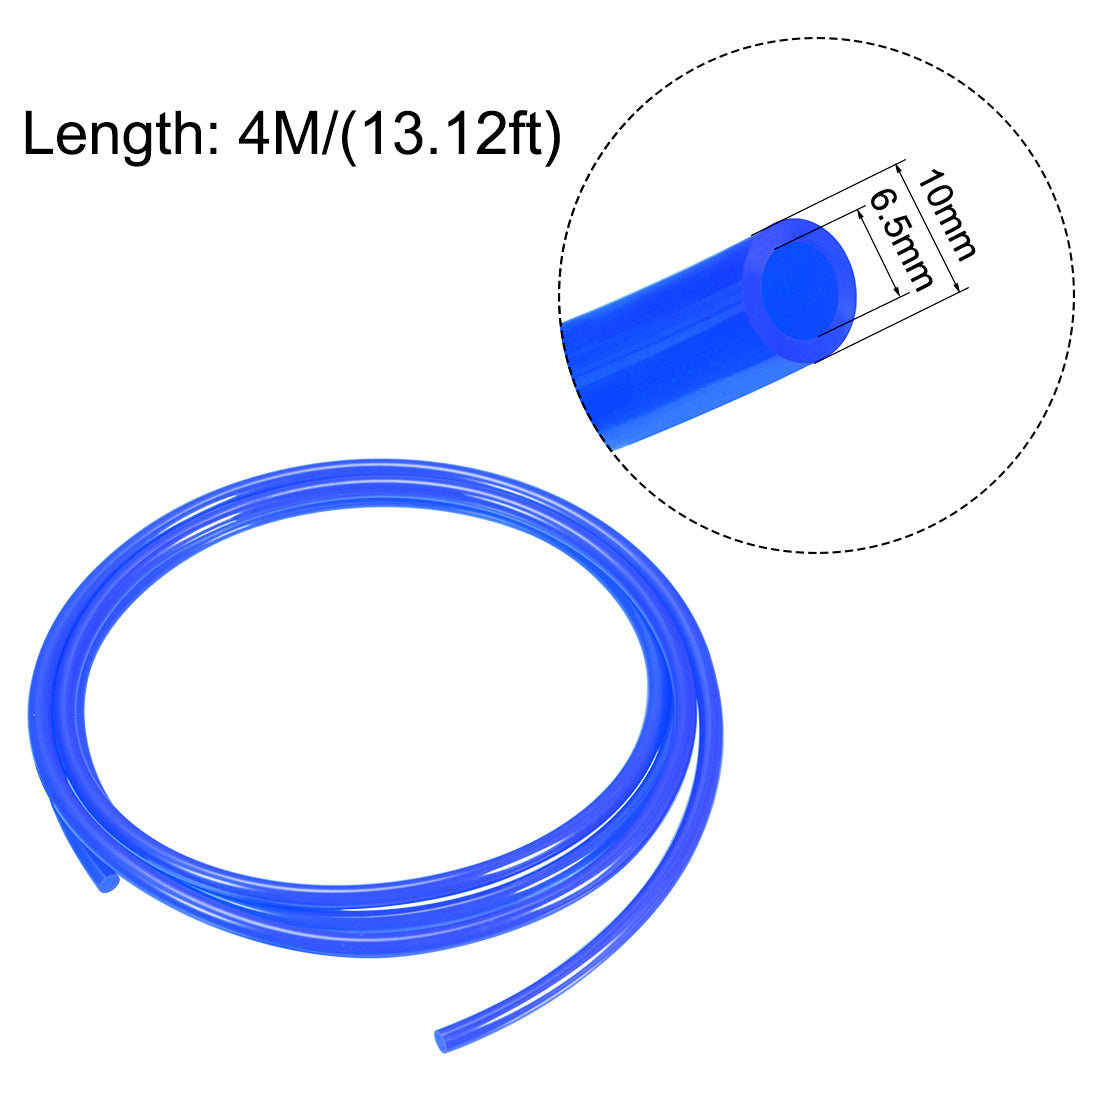 uxcell Uxcell Pneumatic Hose Tubing,10mm OD 6.5mm ID,Polyurethane PU Air Hose Pipe Tube,4 Meter 13.12ft,Blue